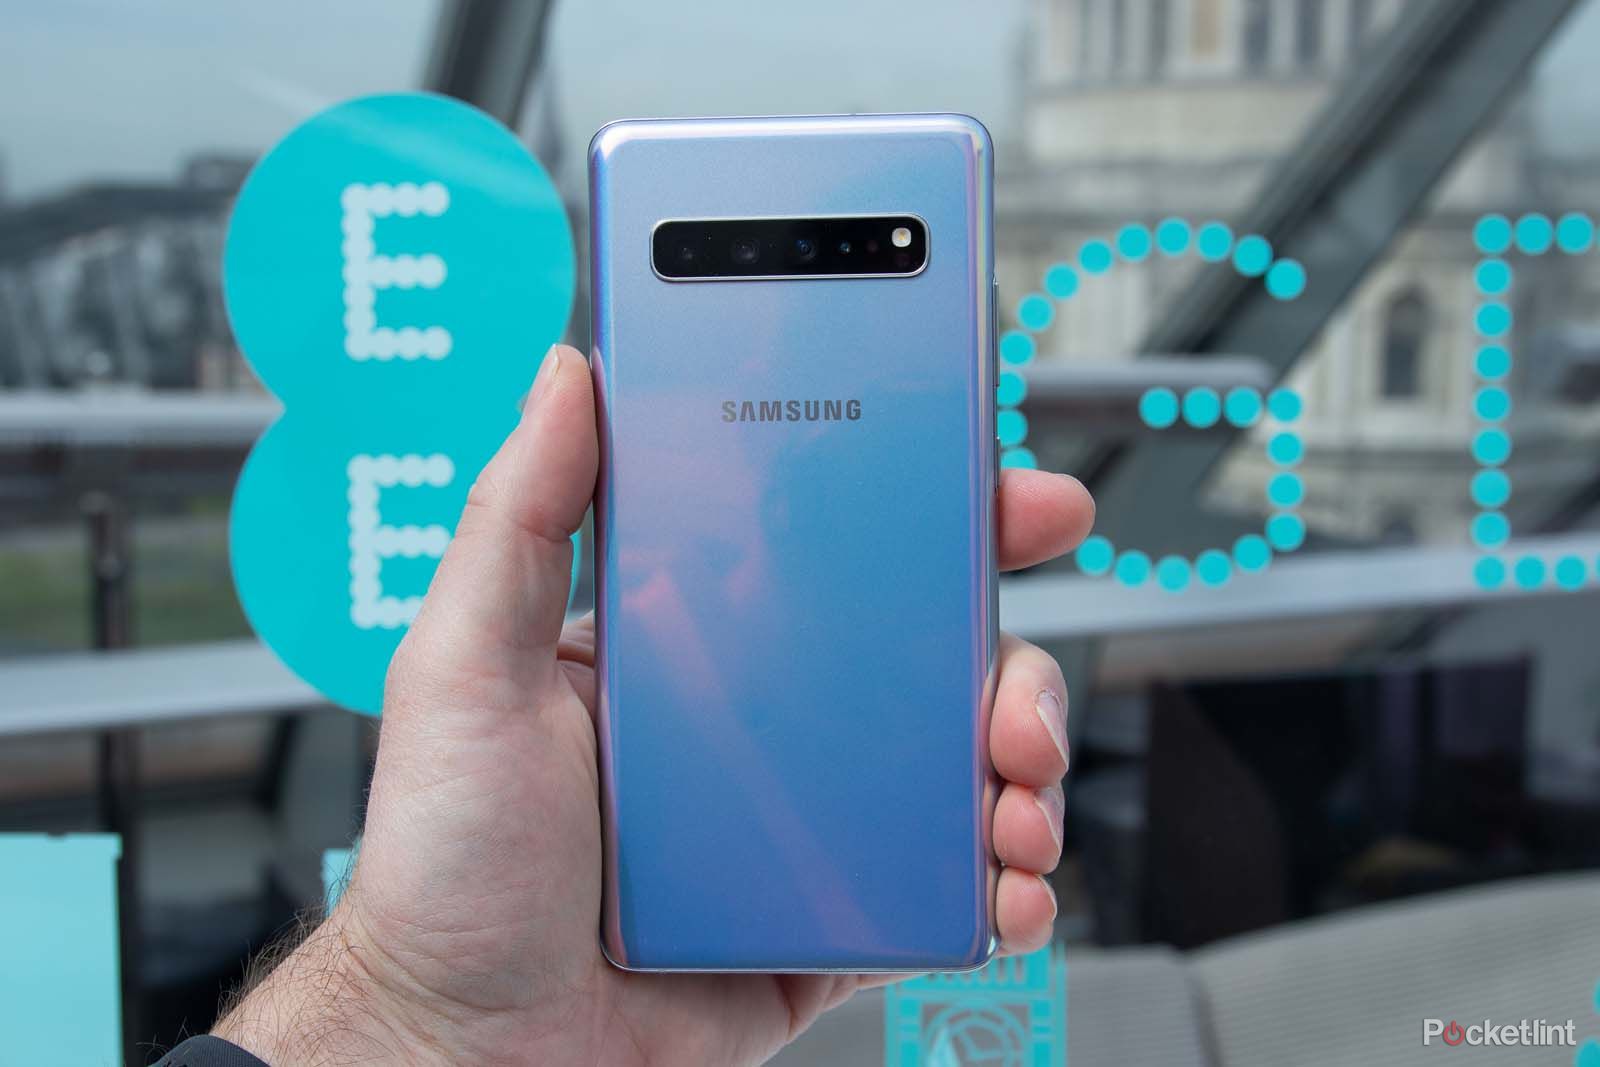 EE now has three more phones available for its new 5G service image 1